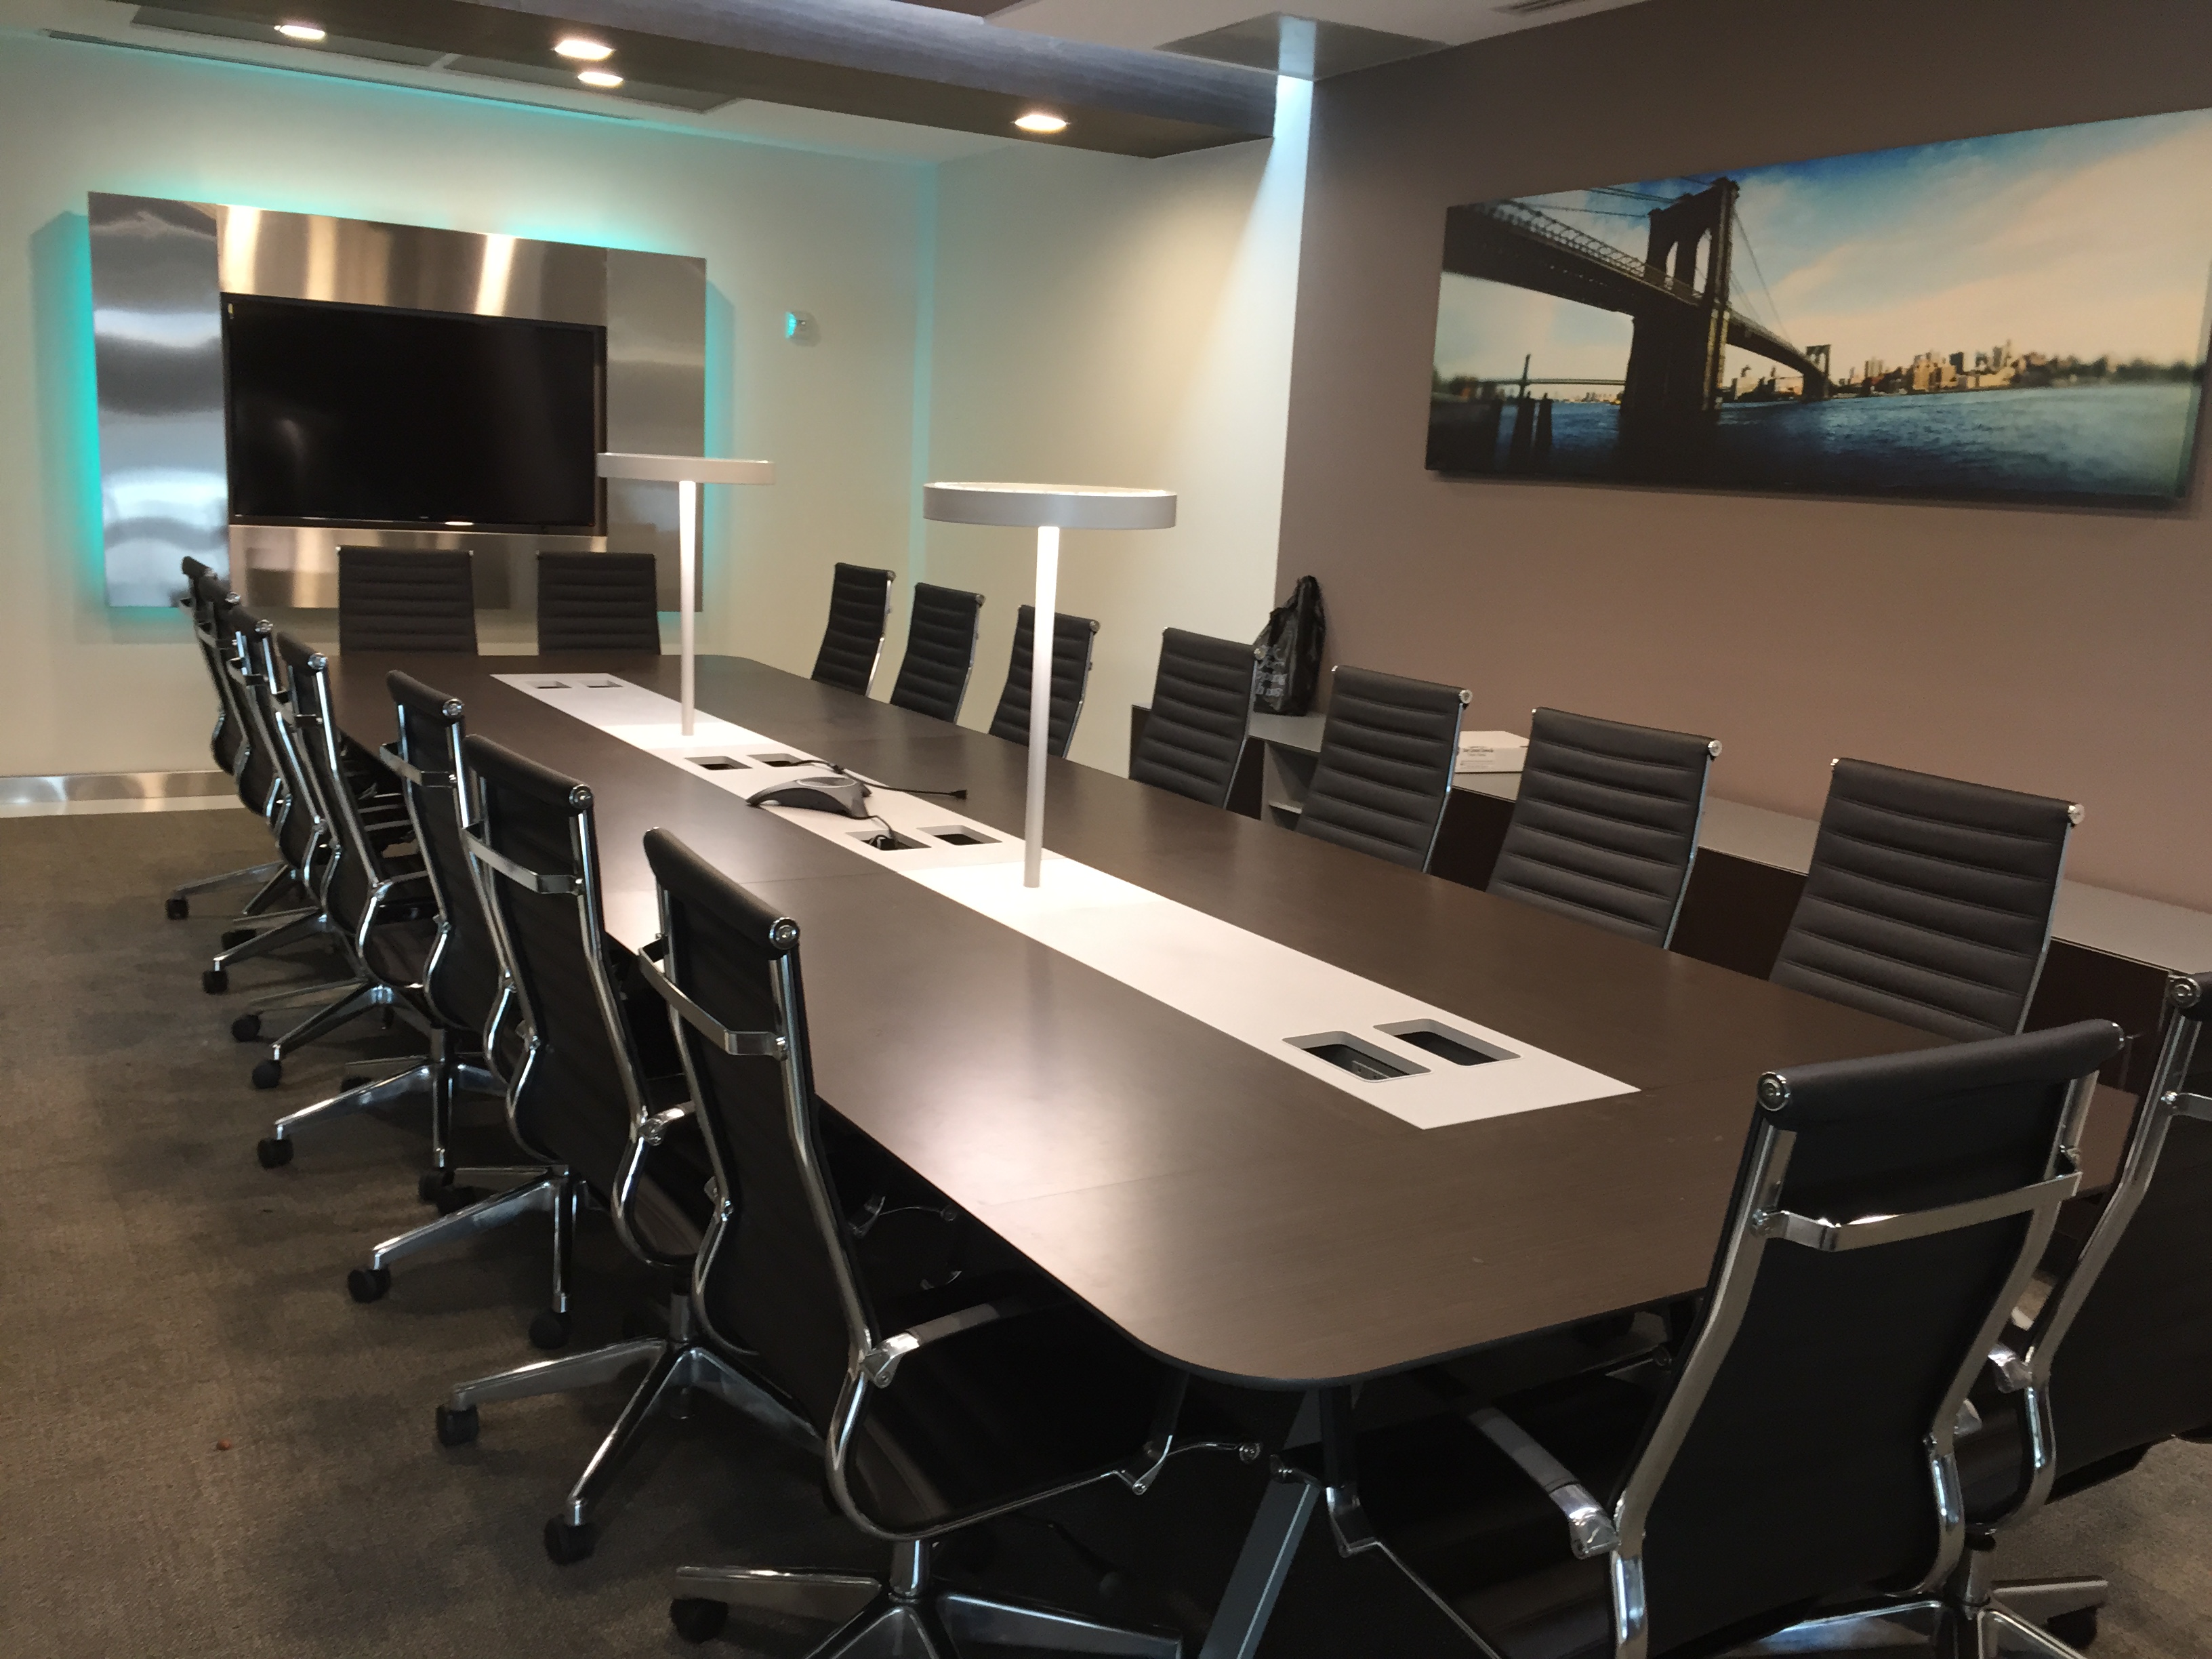 A Jay Suites Meeting Room on 34th Street